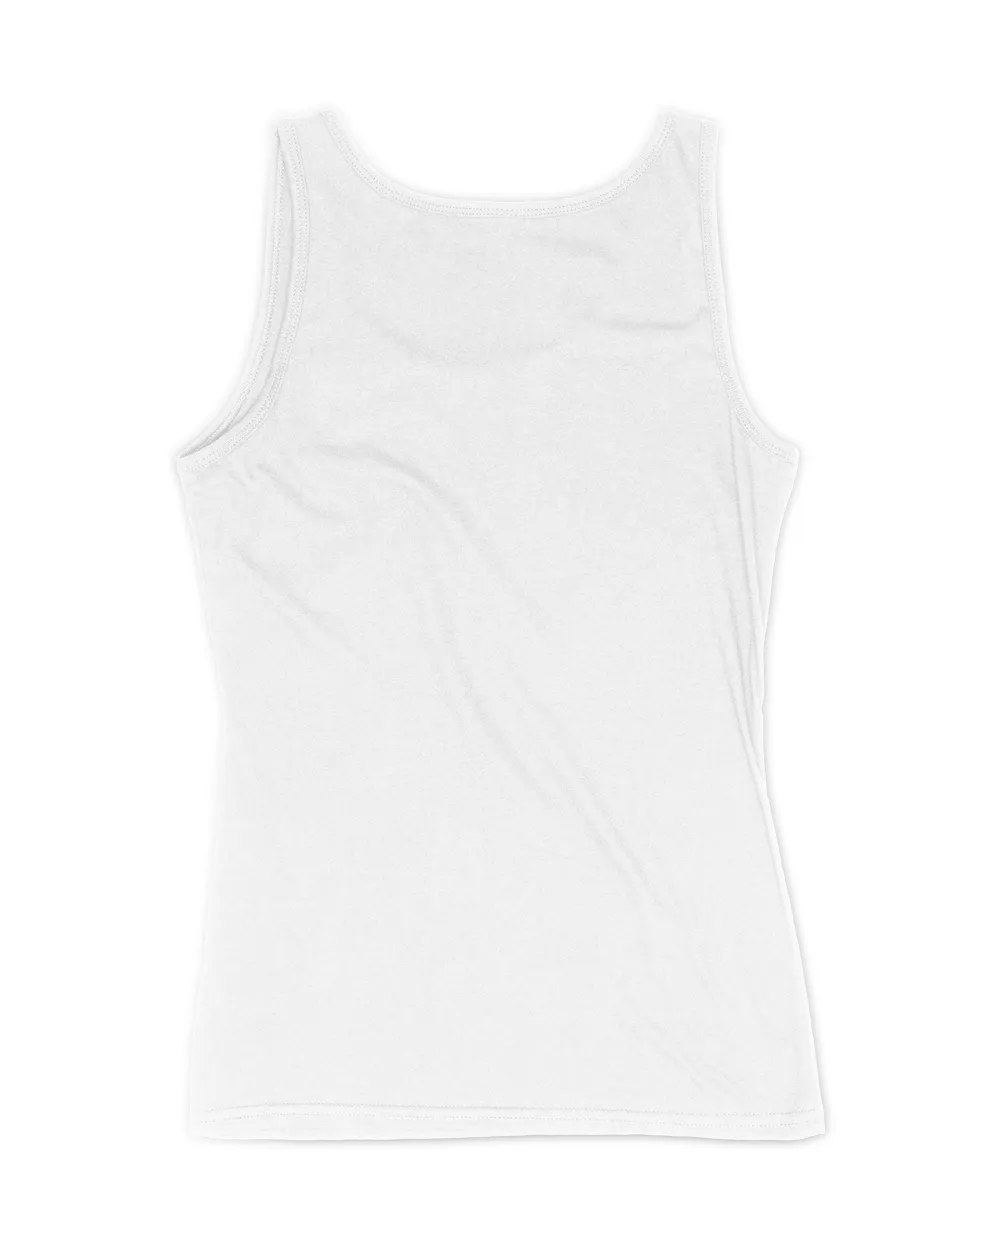 Ghost Boo Bees Tank Top